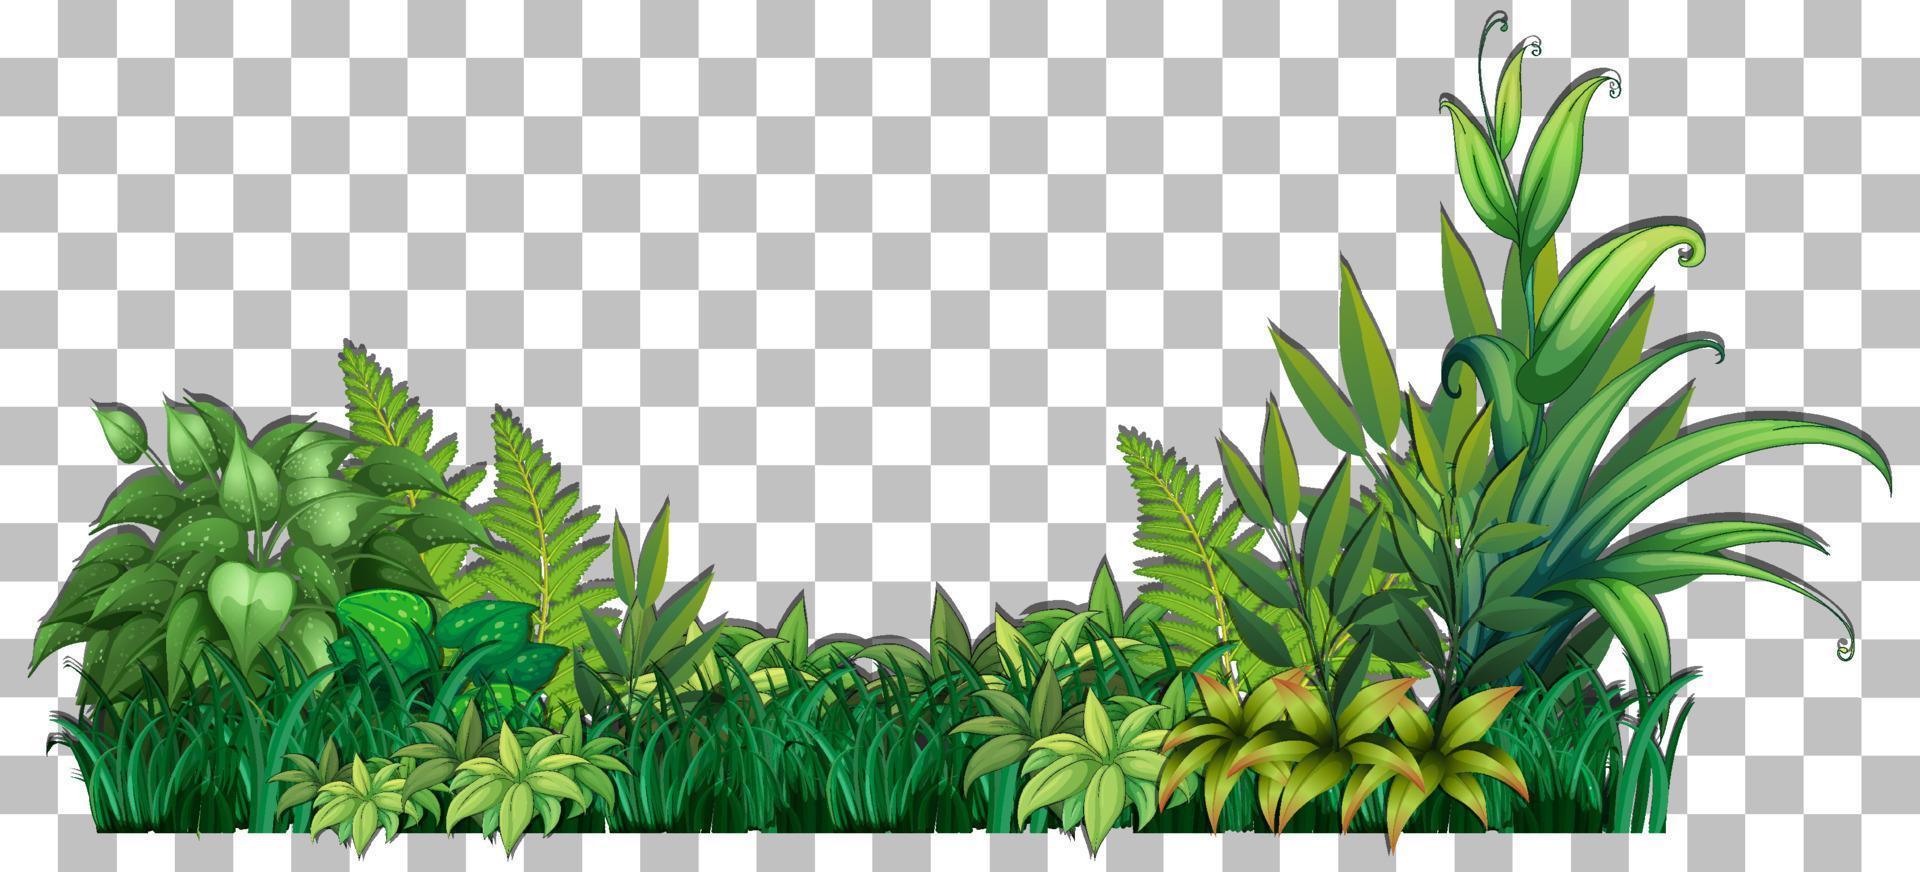 Grass and plants on grid background for decor vector